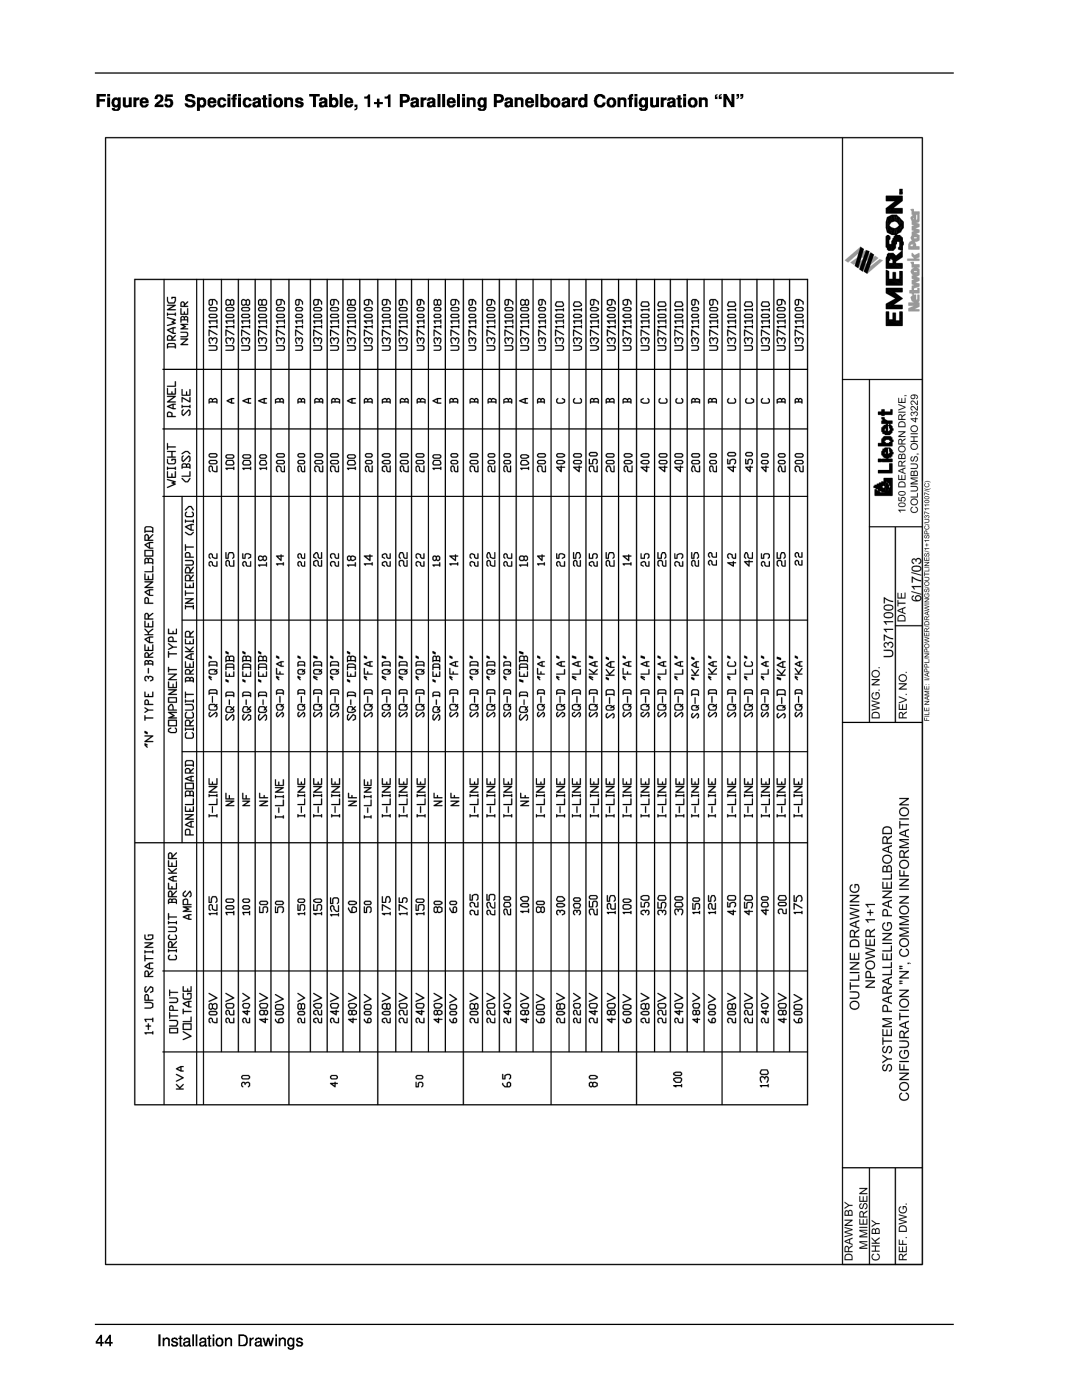 Emerson 30-130 kVA Installation Drawings, Specifications Table, 1+1 Paralleling Panelboard Configuration “N”, NPOWER 1+1 